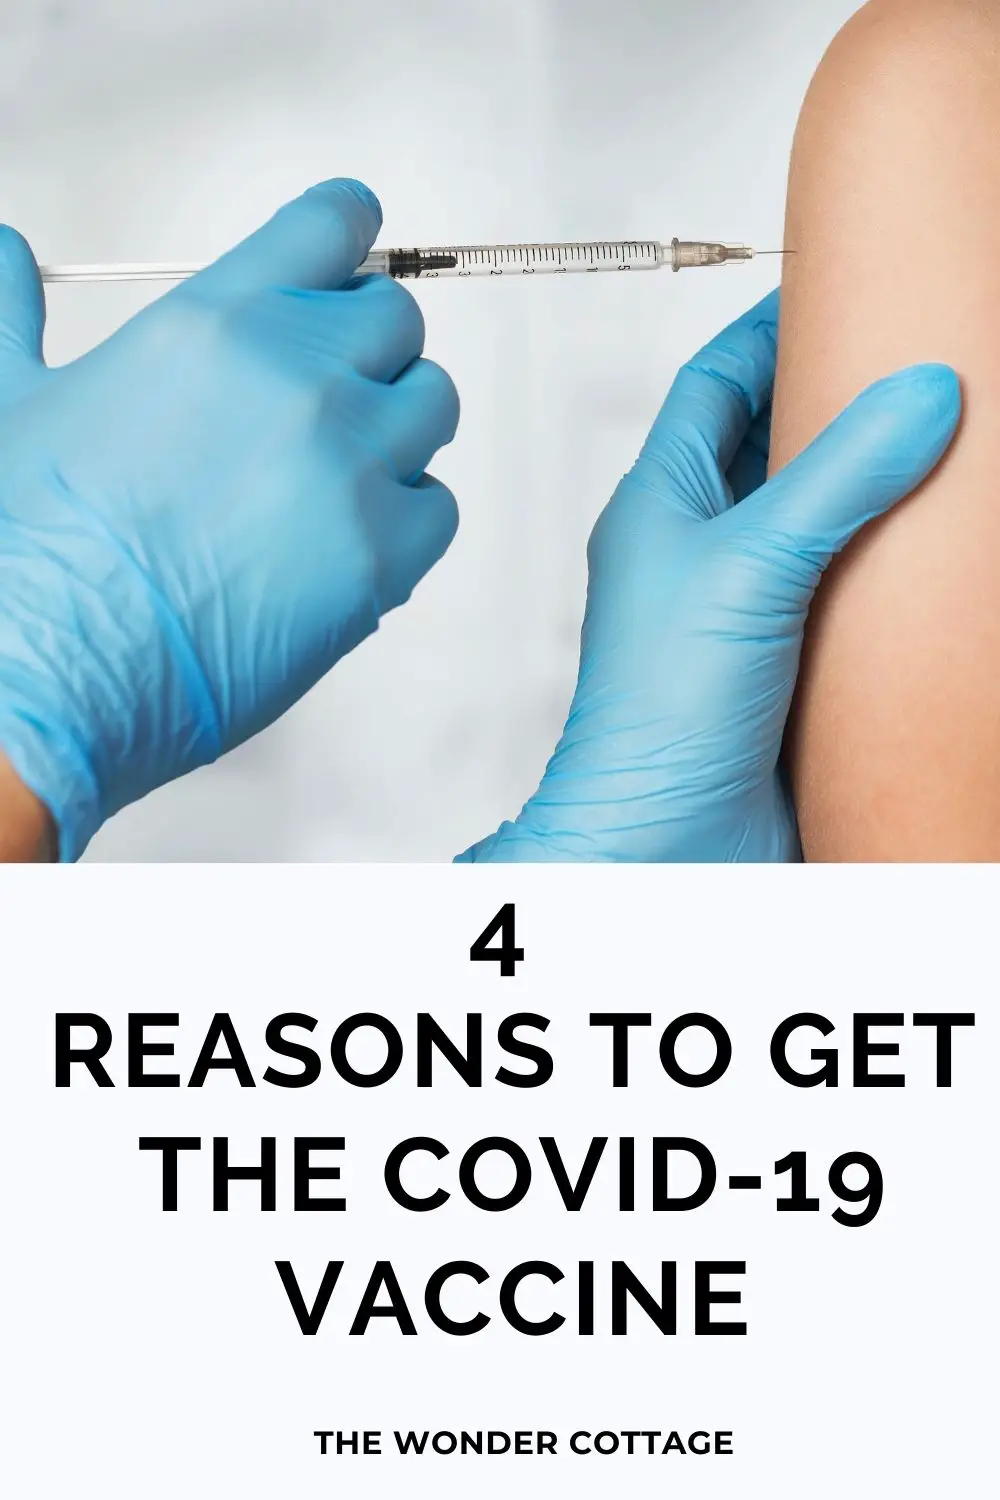 4 reasons to get the covid-19 vaccine